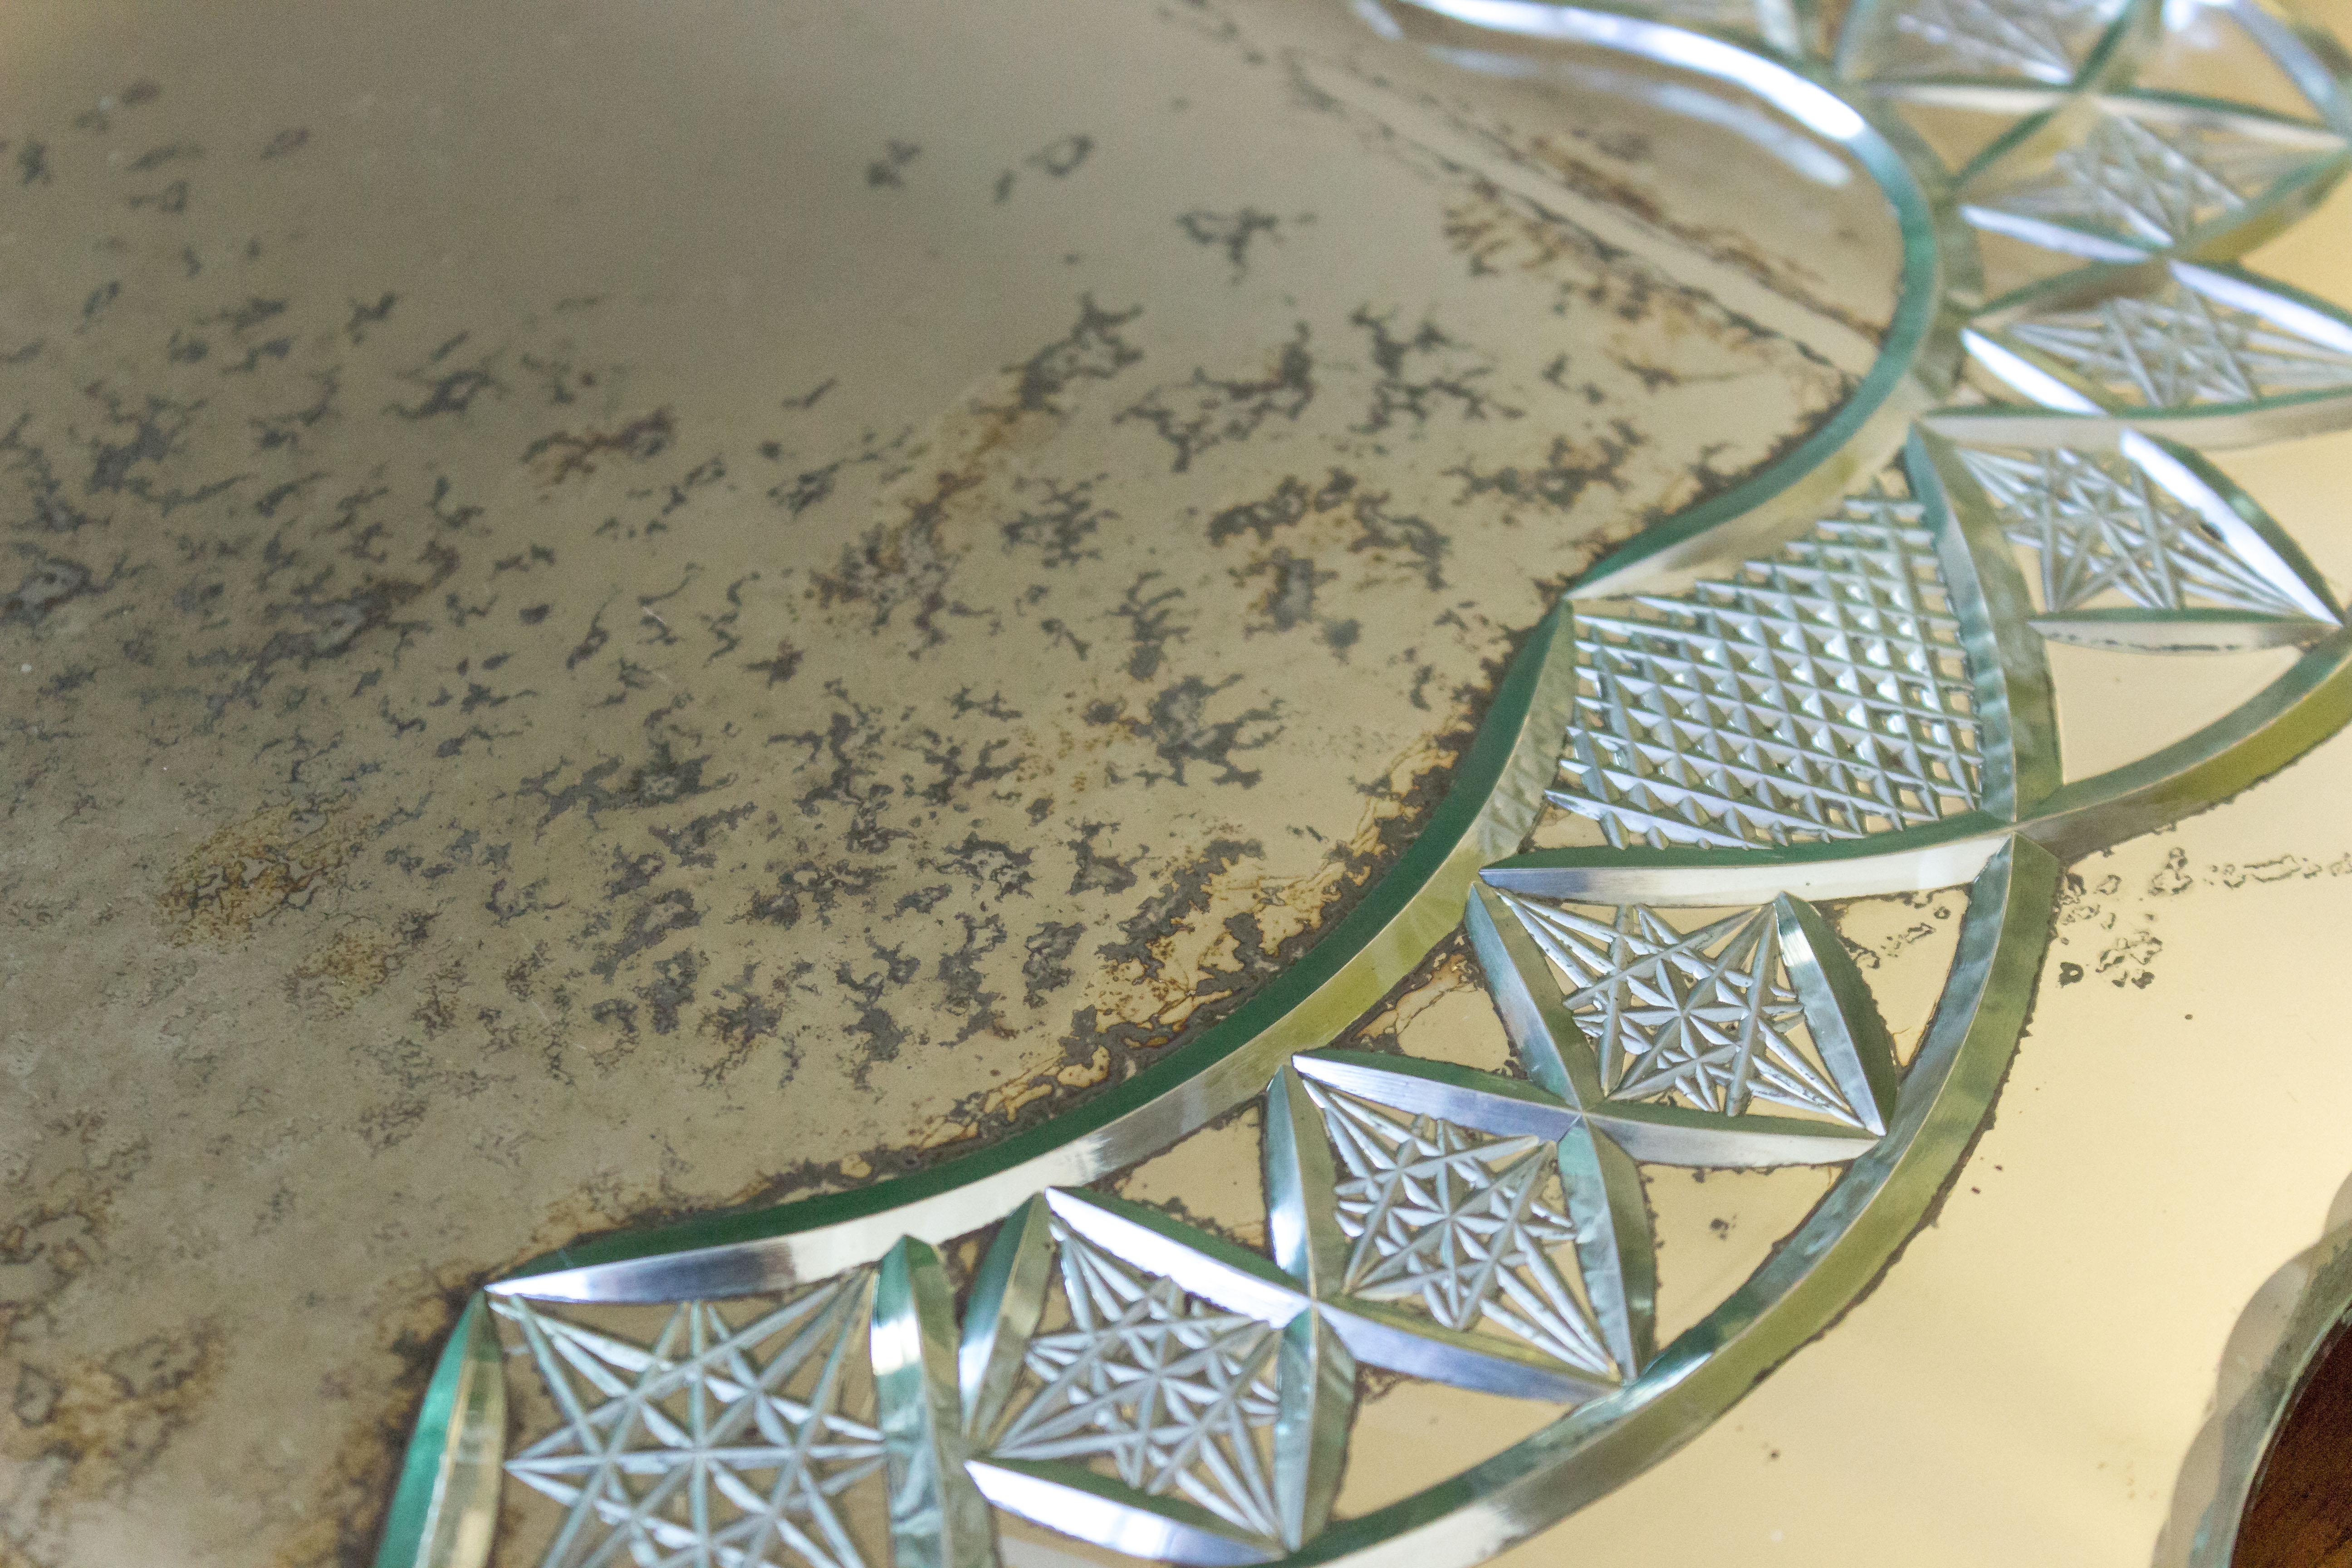 French 1920s etched mirror serving tray with scalloped edges and nickel handles. Very special piece with age quite visible. No chips or damage to tray.

Ref #: D1218-01

Dimensions: 2.5